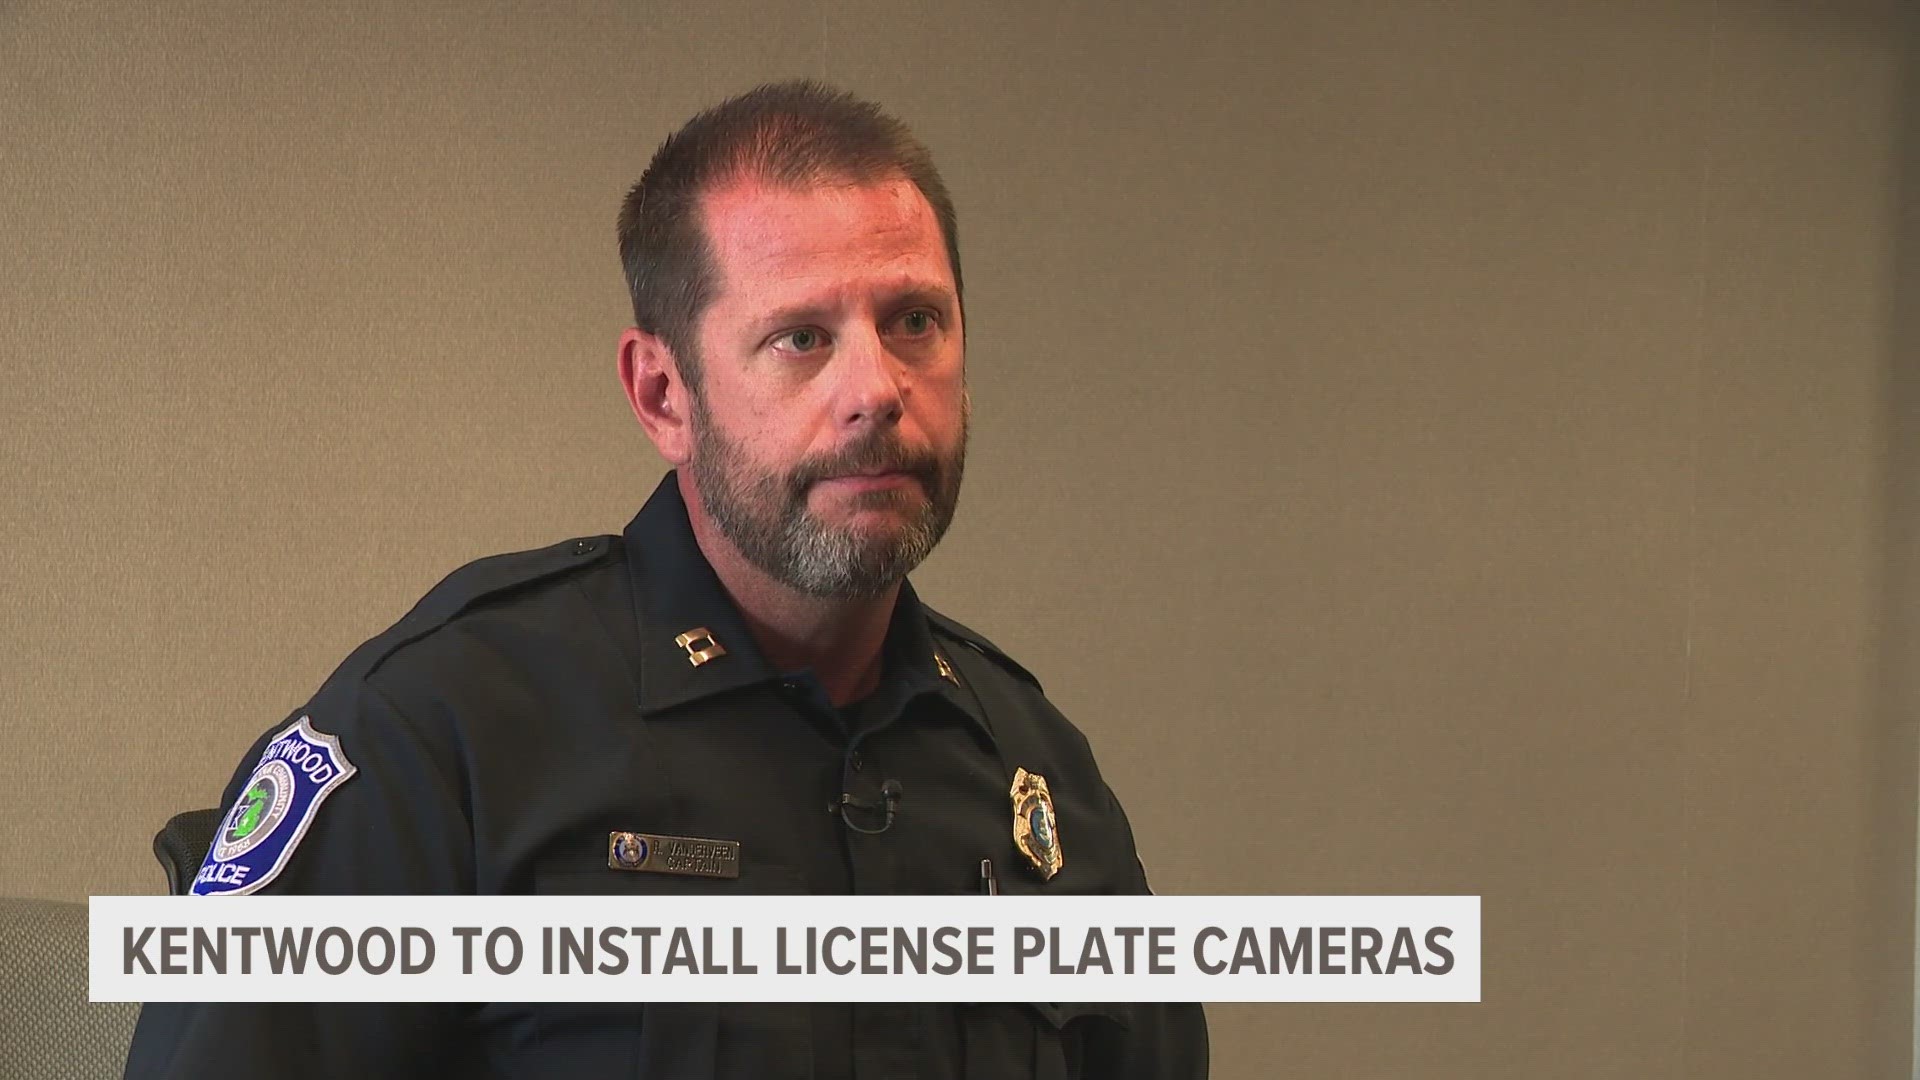 The City of Kentwood approved upward of 60 thousand dollars for the purchase and installation of 10 license plate reader cameras.